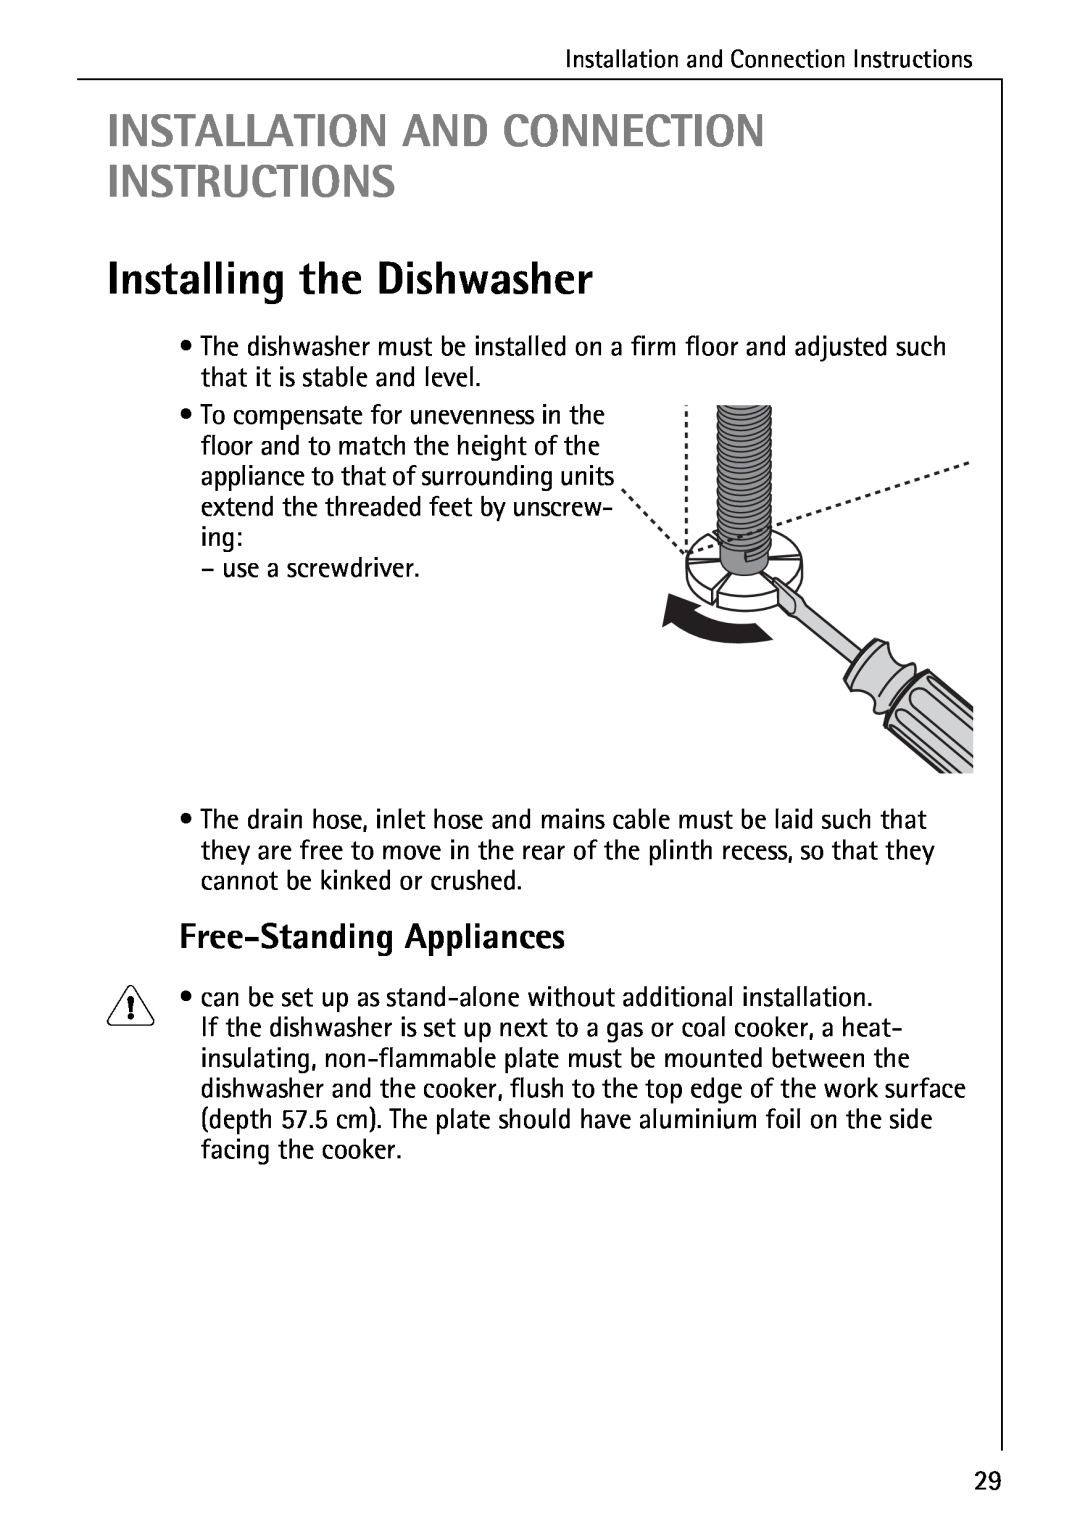 Electrolux 50500 manual Installation And Connection Instructions, Installing the Dishwasher, Free-Standing Appliances 